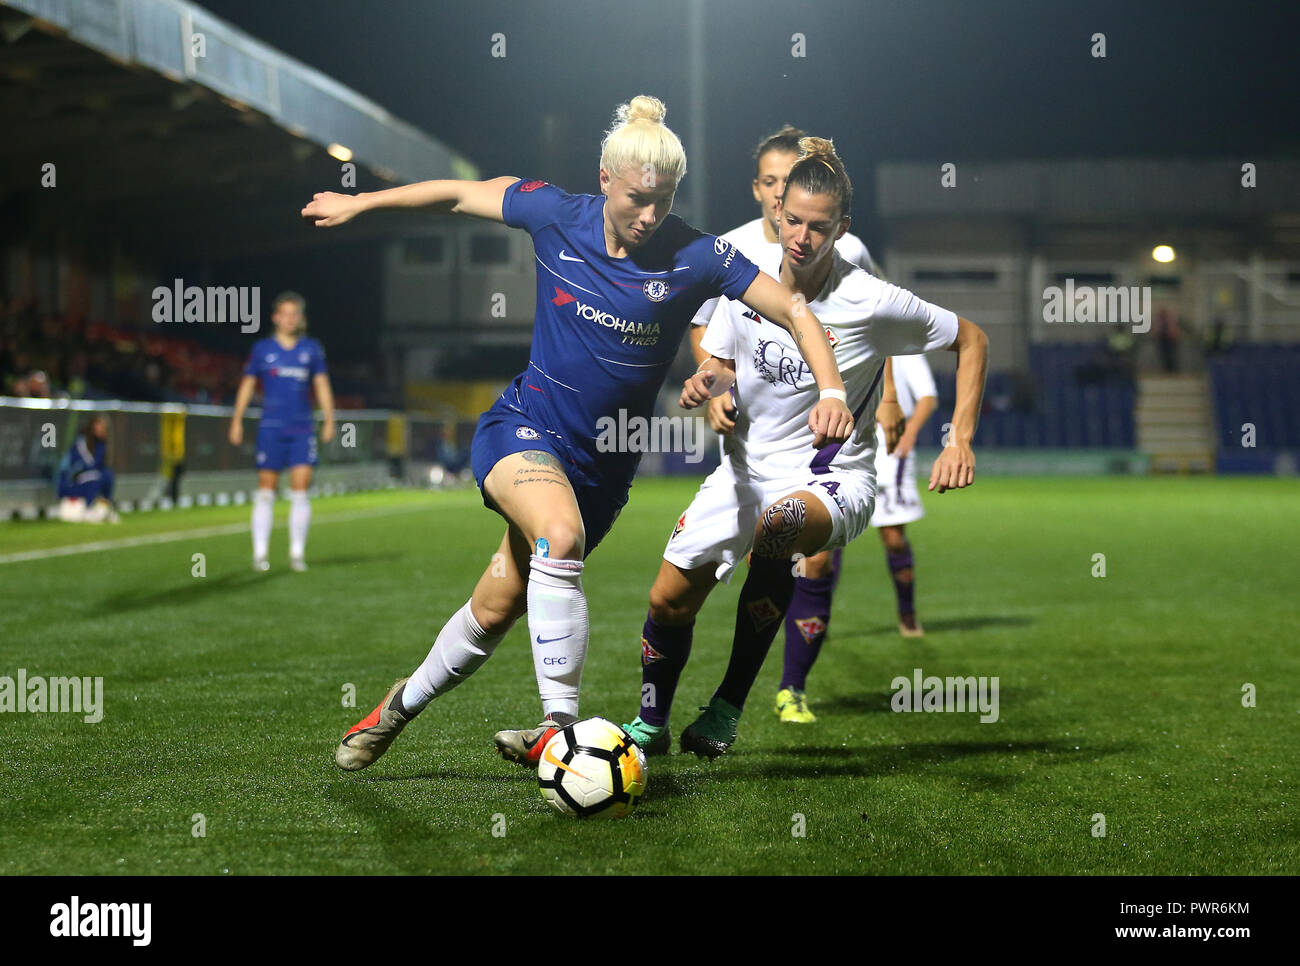 Chelsea Women's Bethany England (left) and Fiorentina Femminile's Laura Agard (right) battle for the ball during the Women's Champions League first leg match at Kingsmeadow, London. PRESS ASSOCIATION Photo. Picture date: Wednesday October 17, 2018. See PA story SOCCER Chelsea Women. Photo credit should read: Steven Paston/PA Wire. . Stock Photo